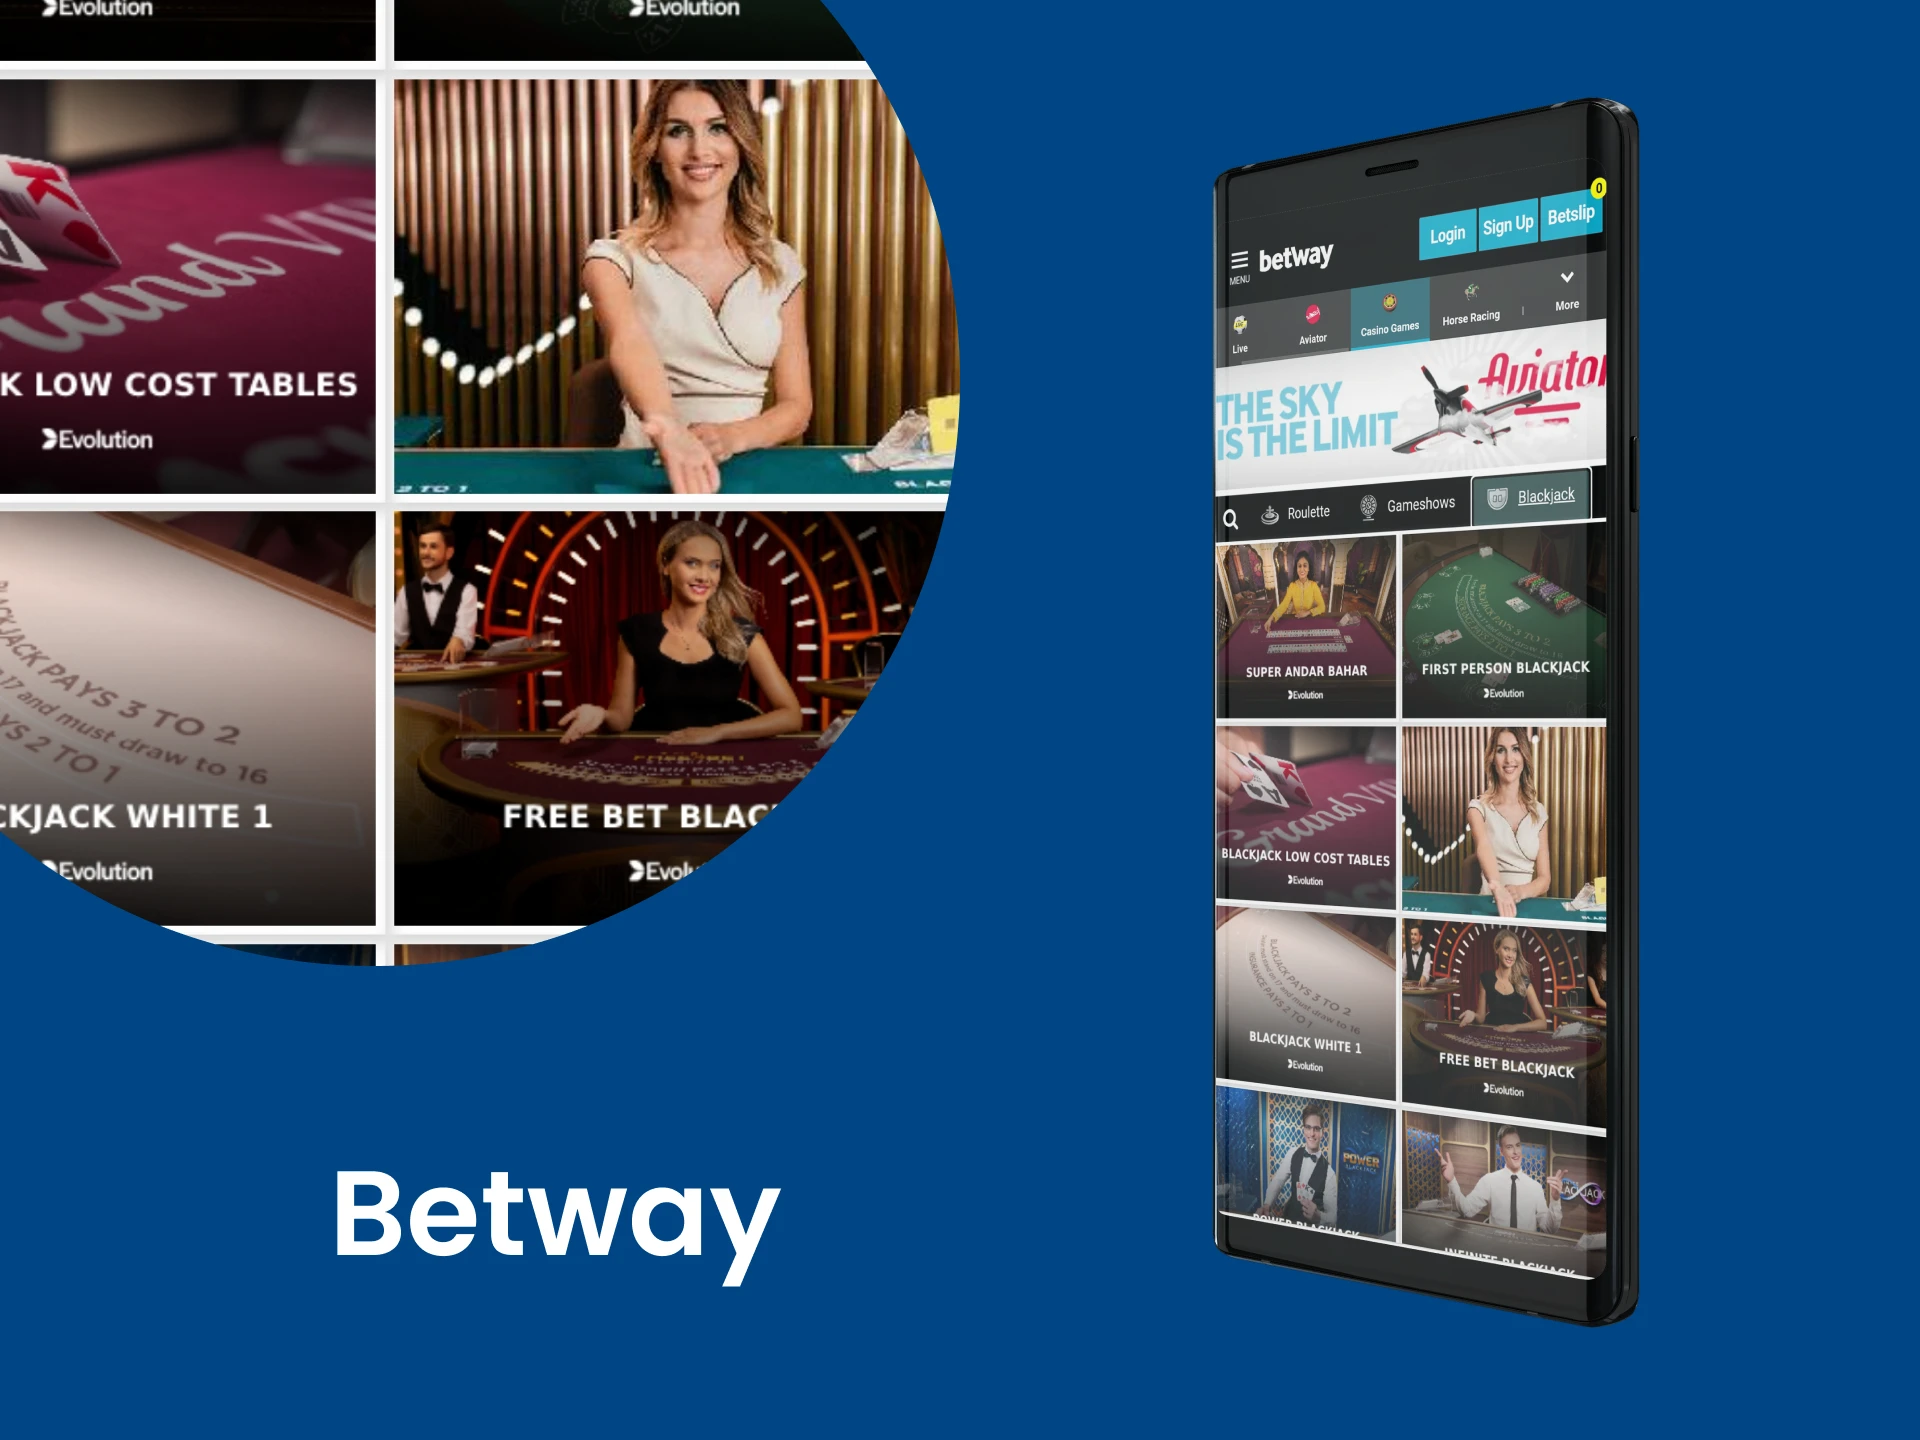 To play BlackJack, choose the Betway application.